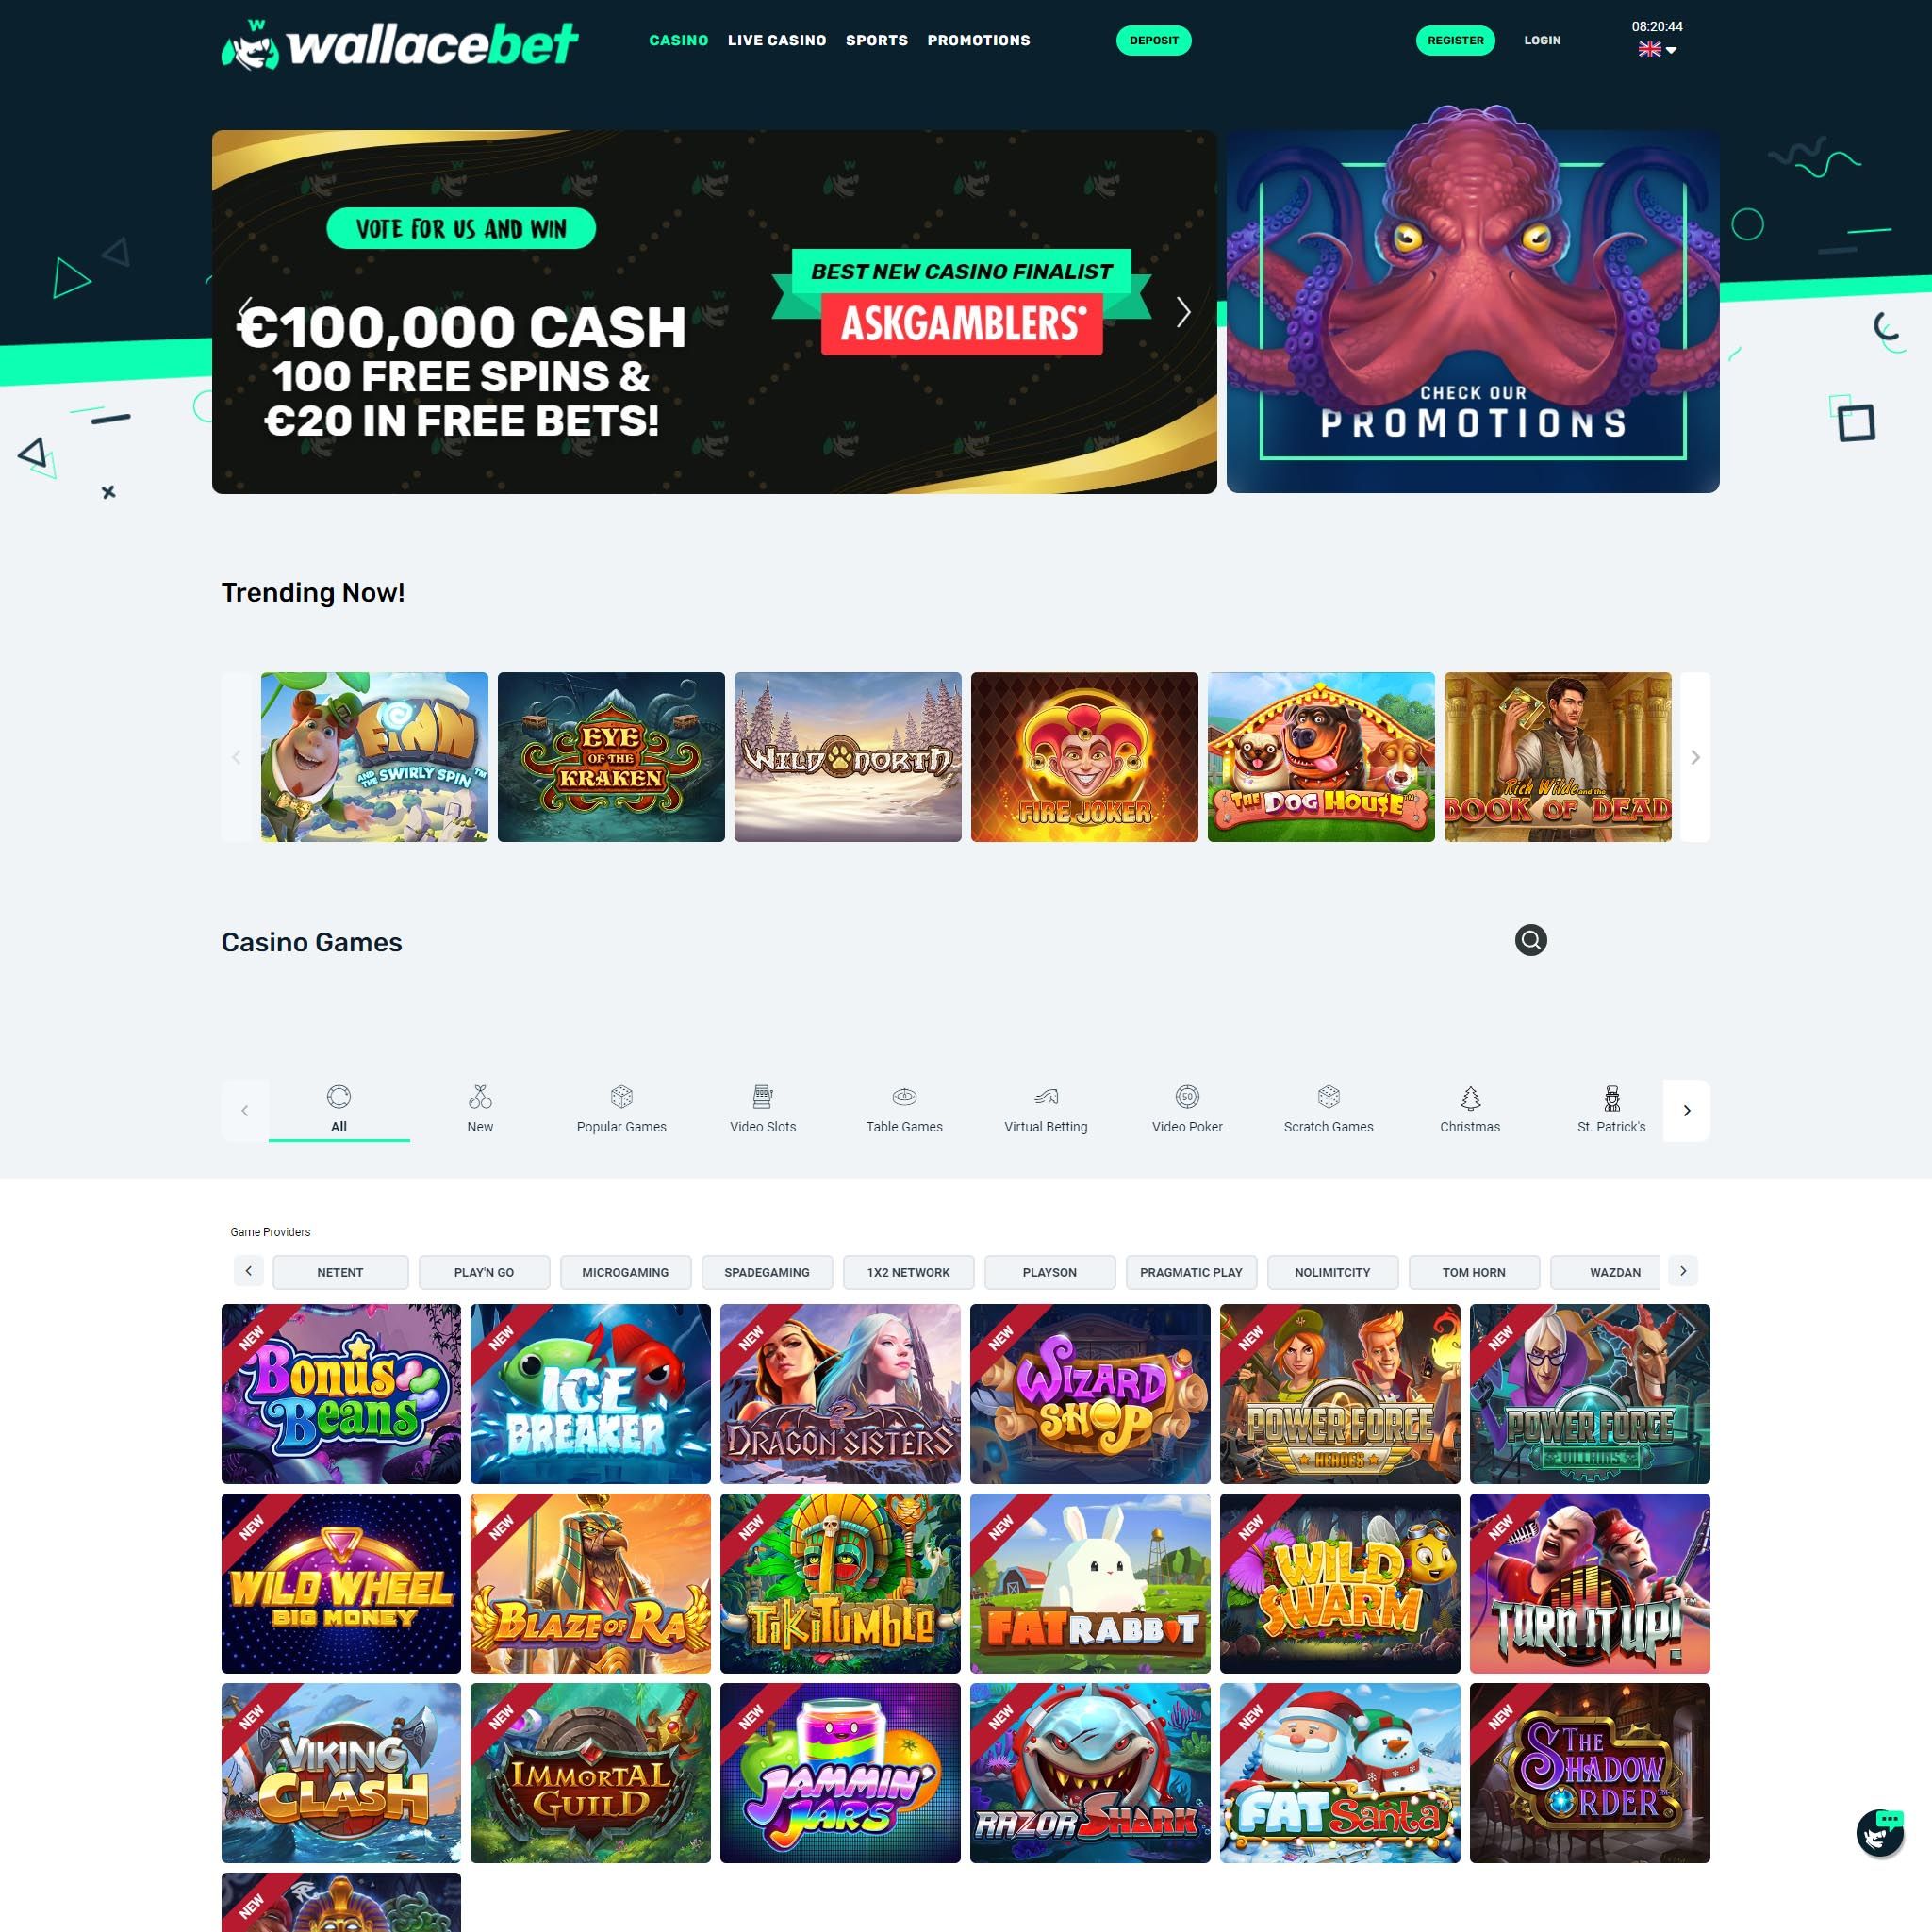 Wallacebet Casino review by Mr. Gamble